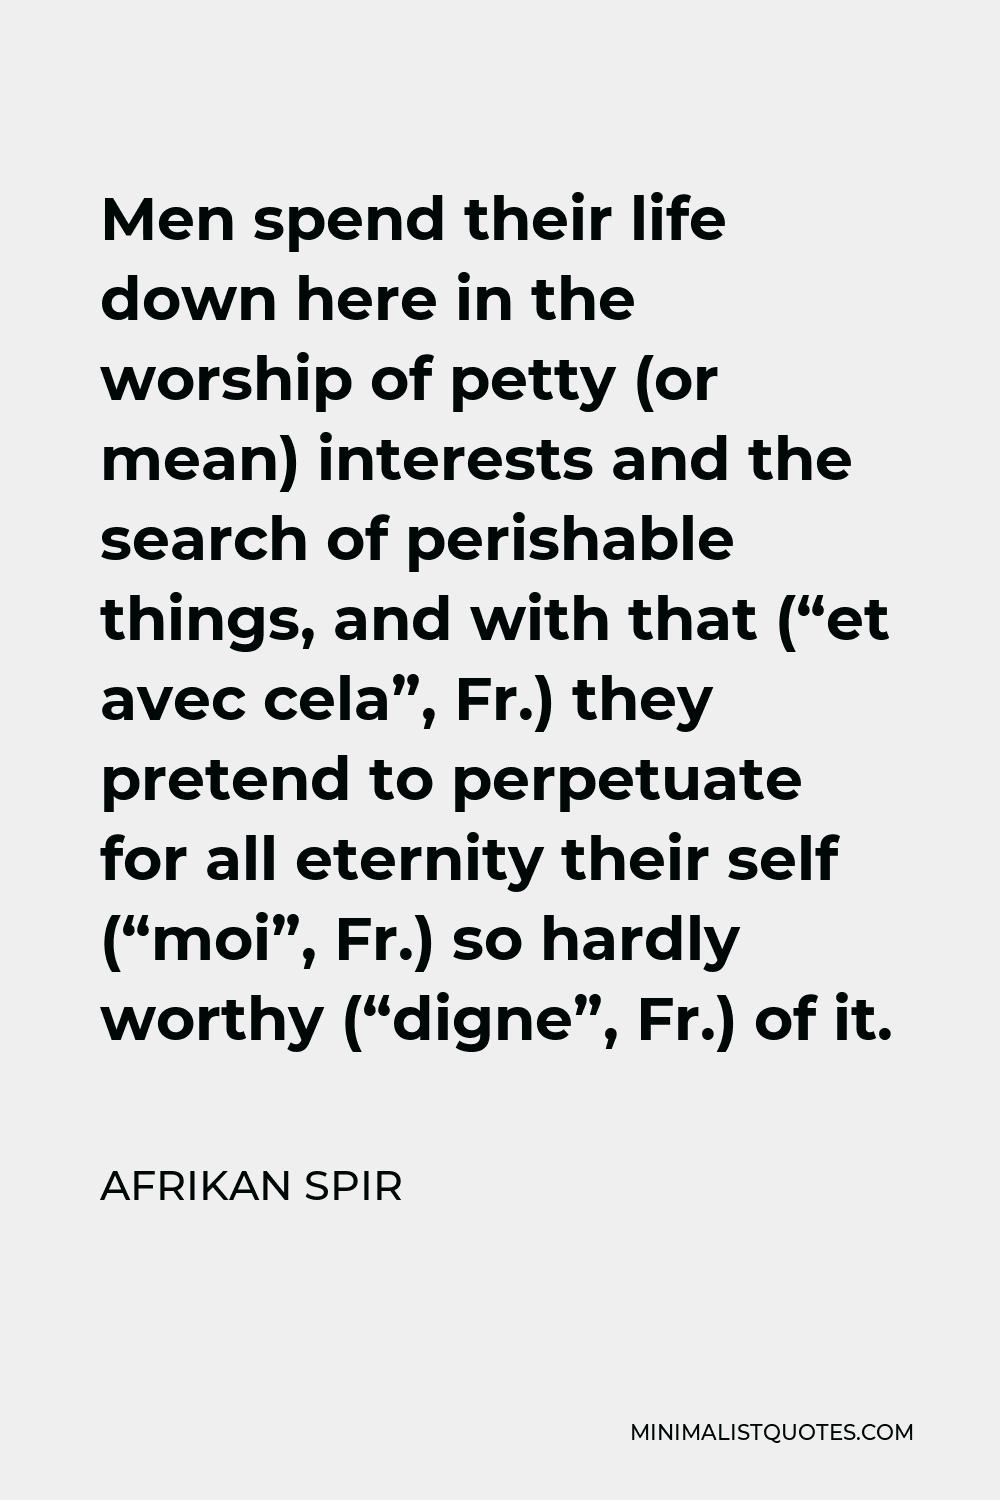 Afrikan Spir Quote - Men spend their life down here in the worship of petty (or mean) interests and the search of perishable things, and with that (“et avec cela”, Fr.) they pretend to perpetuate for all eternity their self (“moi”, Fr.) so hardly worthy (“digne”, Fr.) of it.